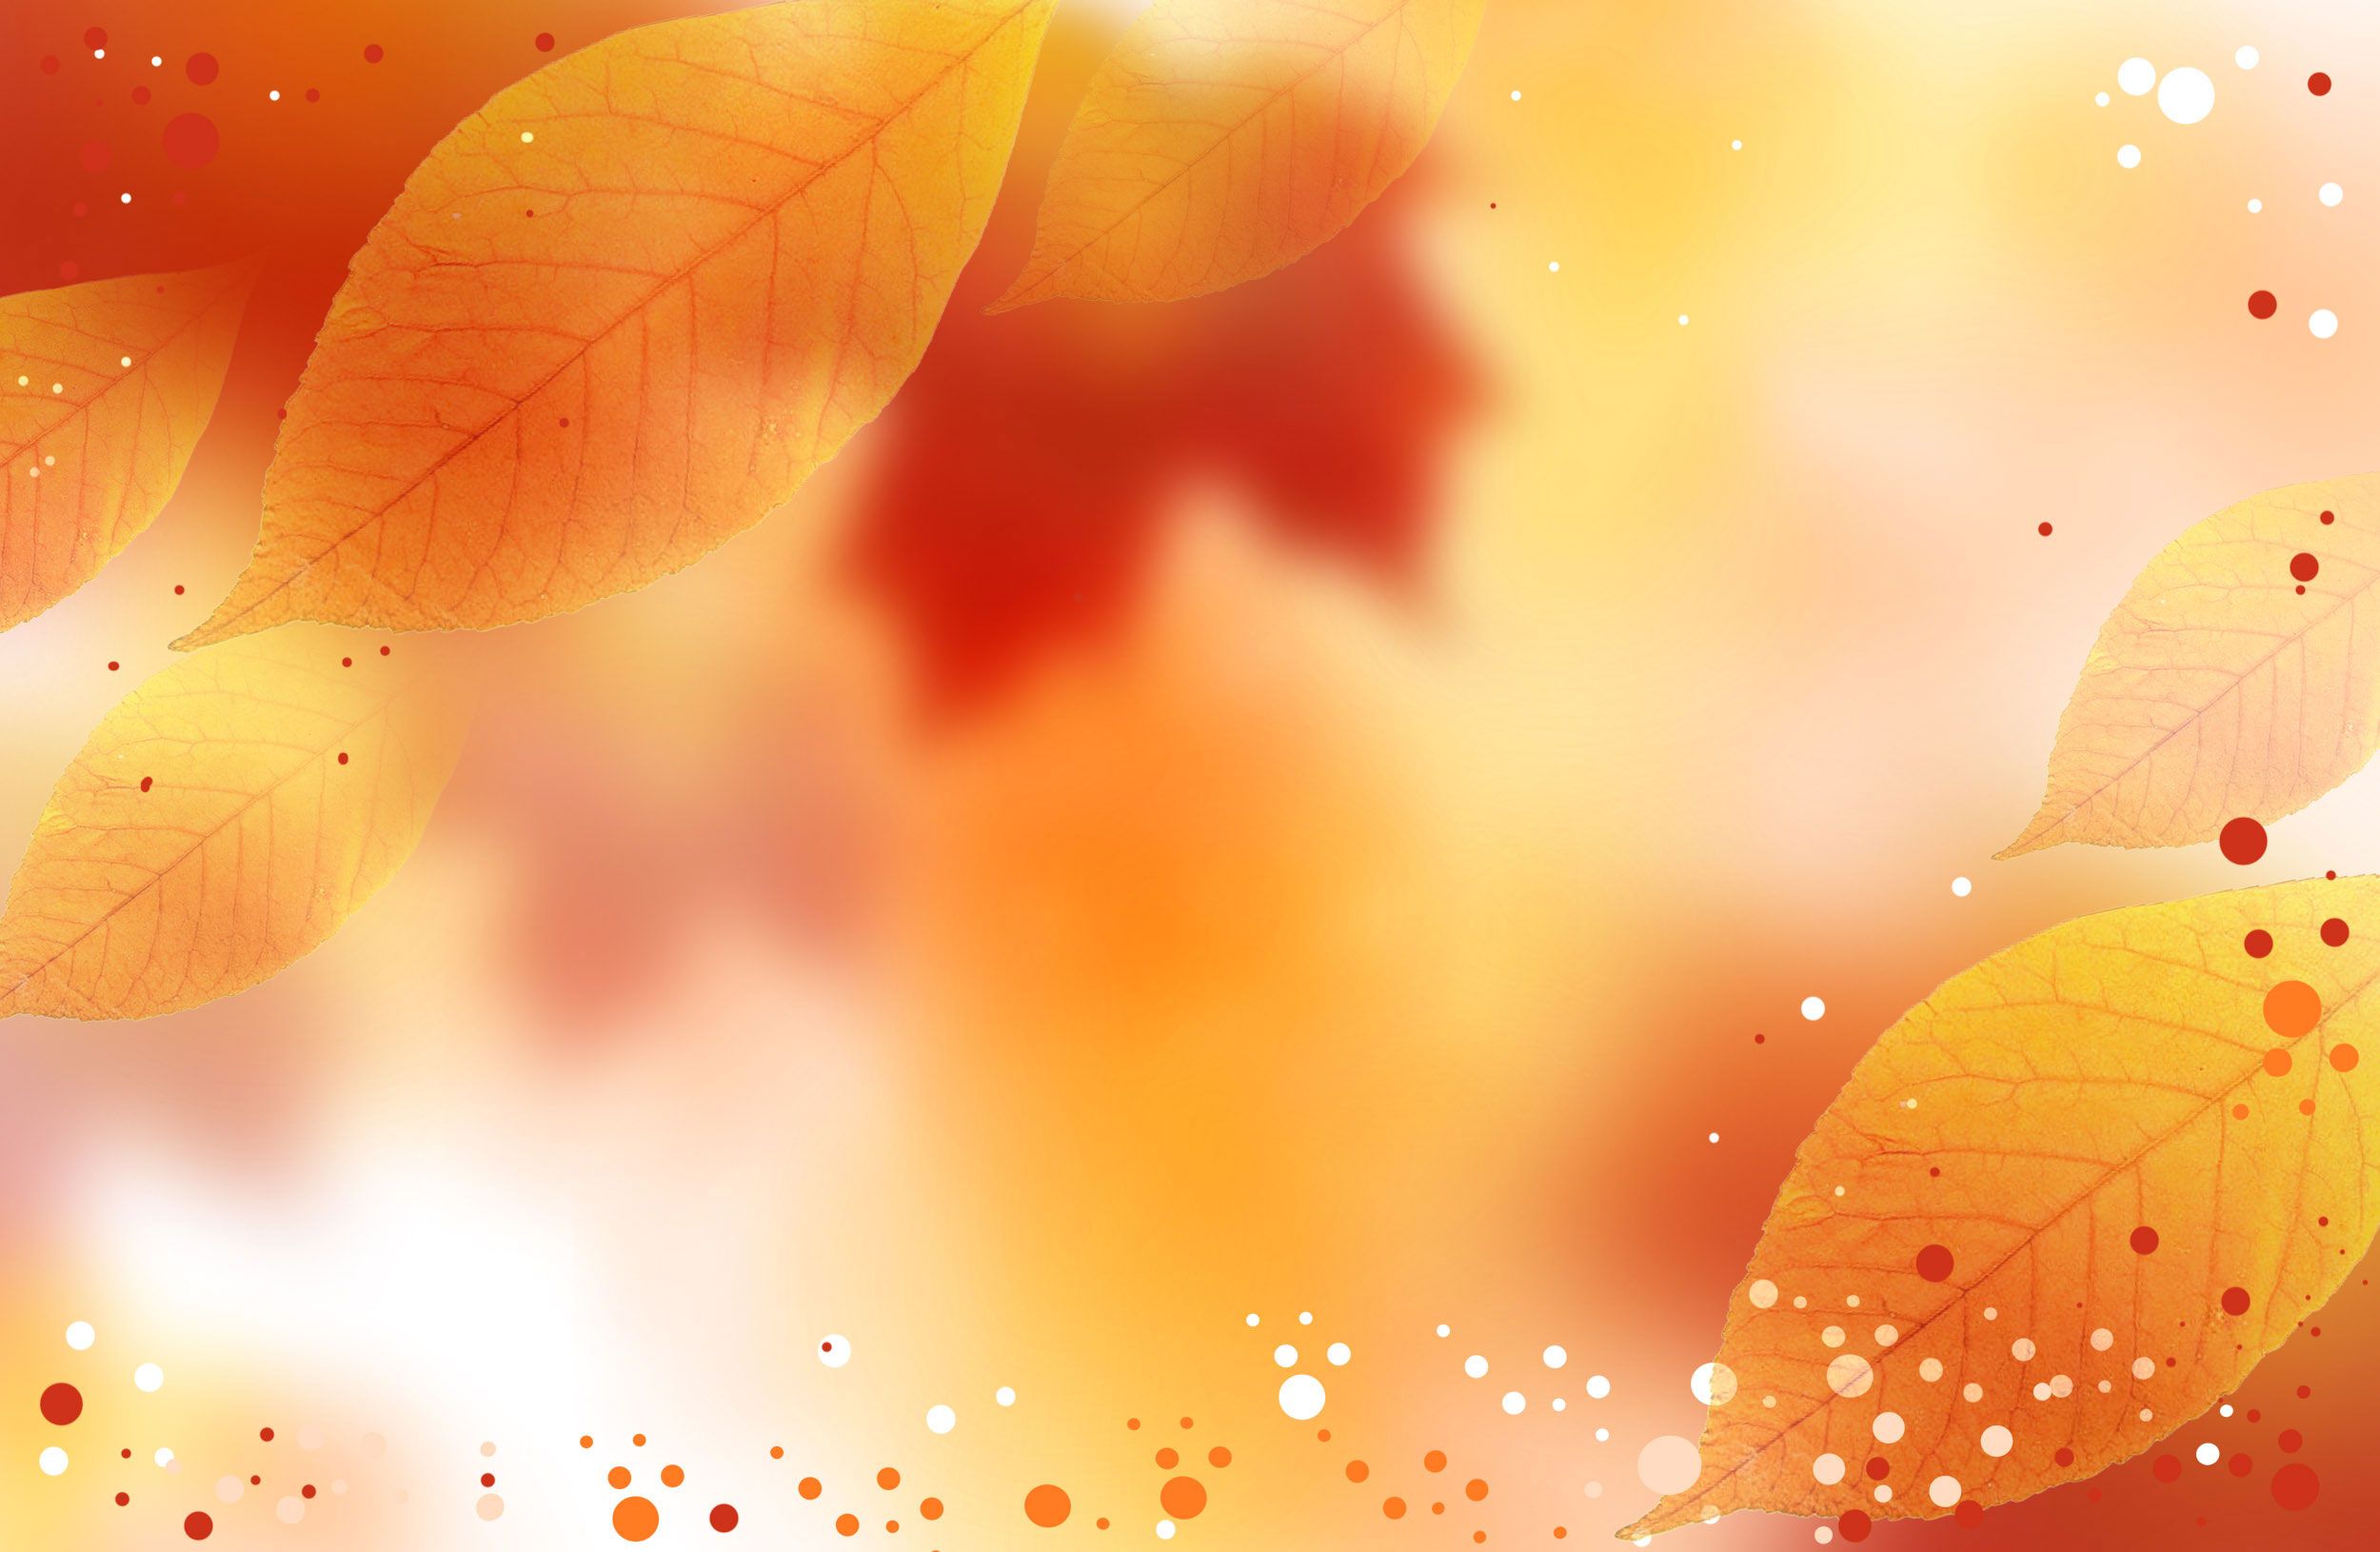 2011 Autumn HD Wallpapers to Download | CreativityWindow™